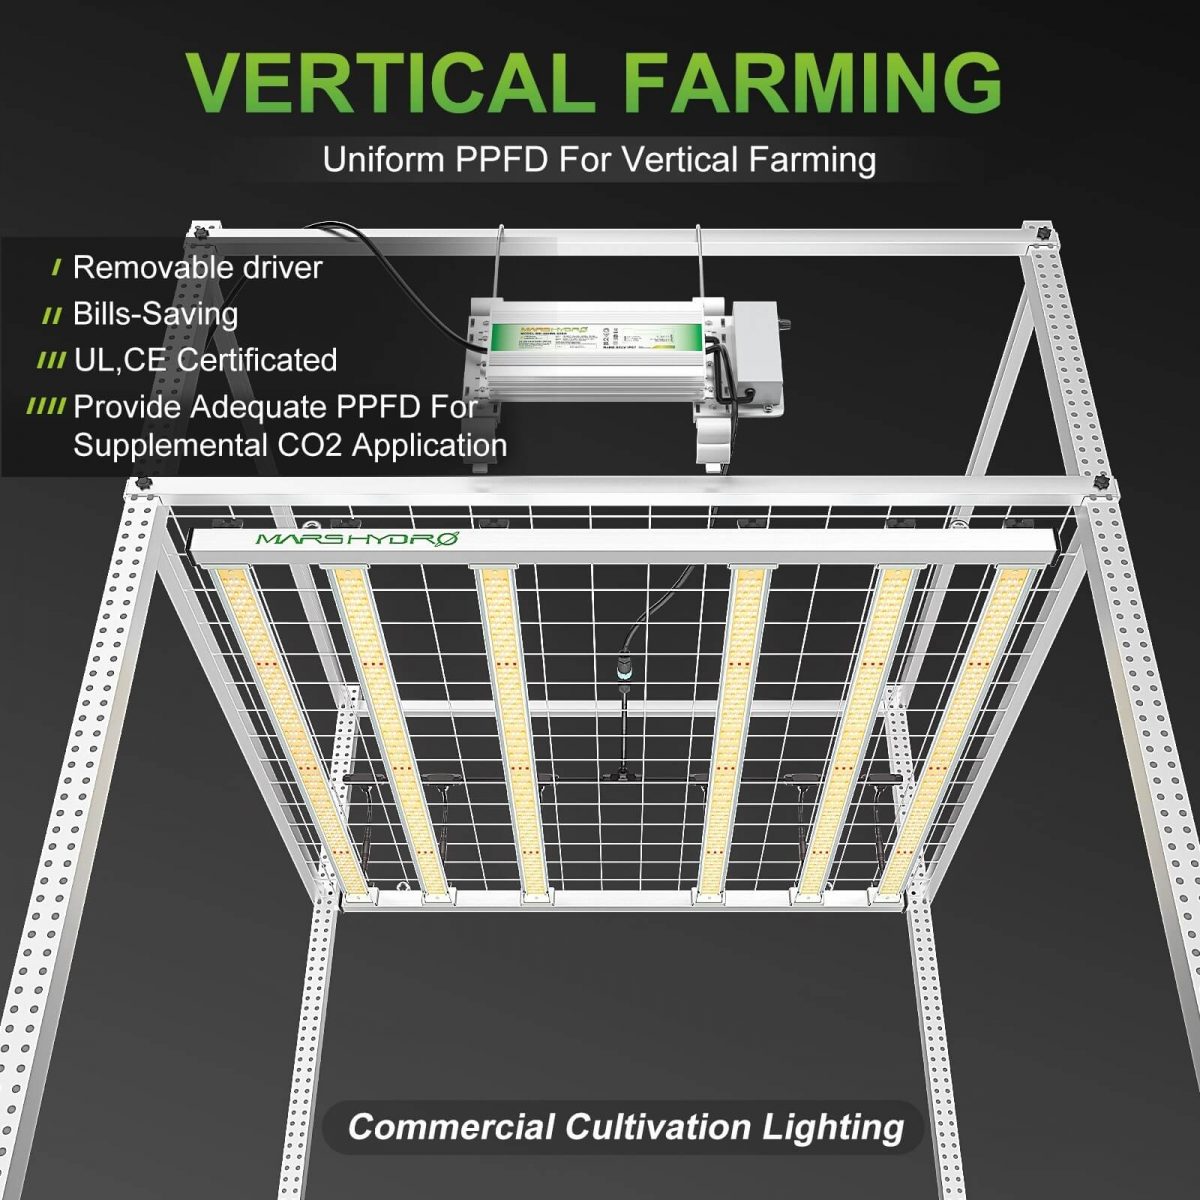 Mars Hydro FC-E4800 is commercial indoor projects led grow light due to its uniform PPFD for vertical farms.